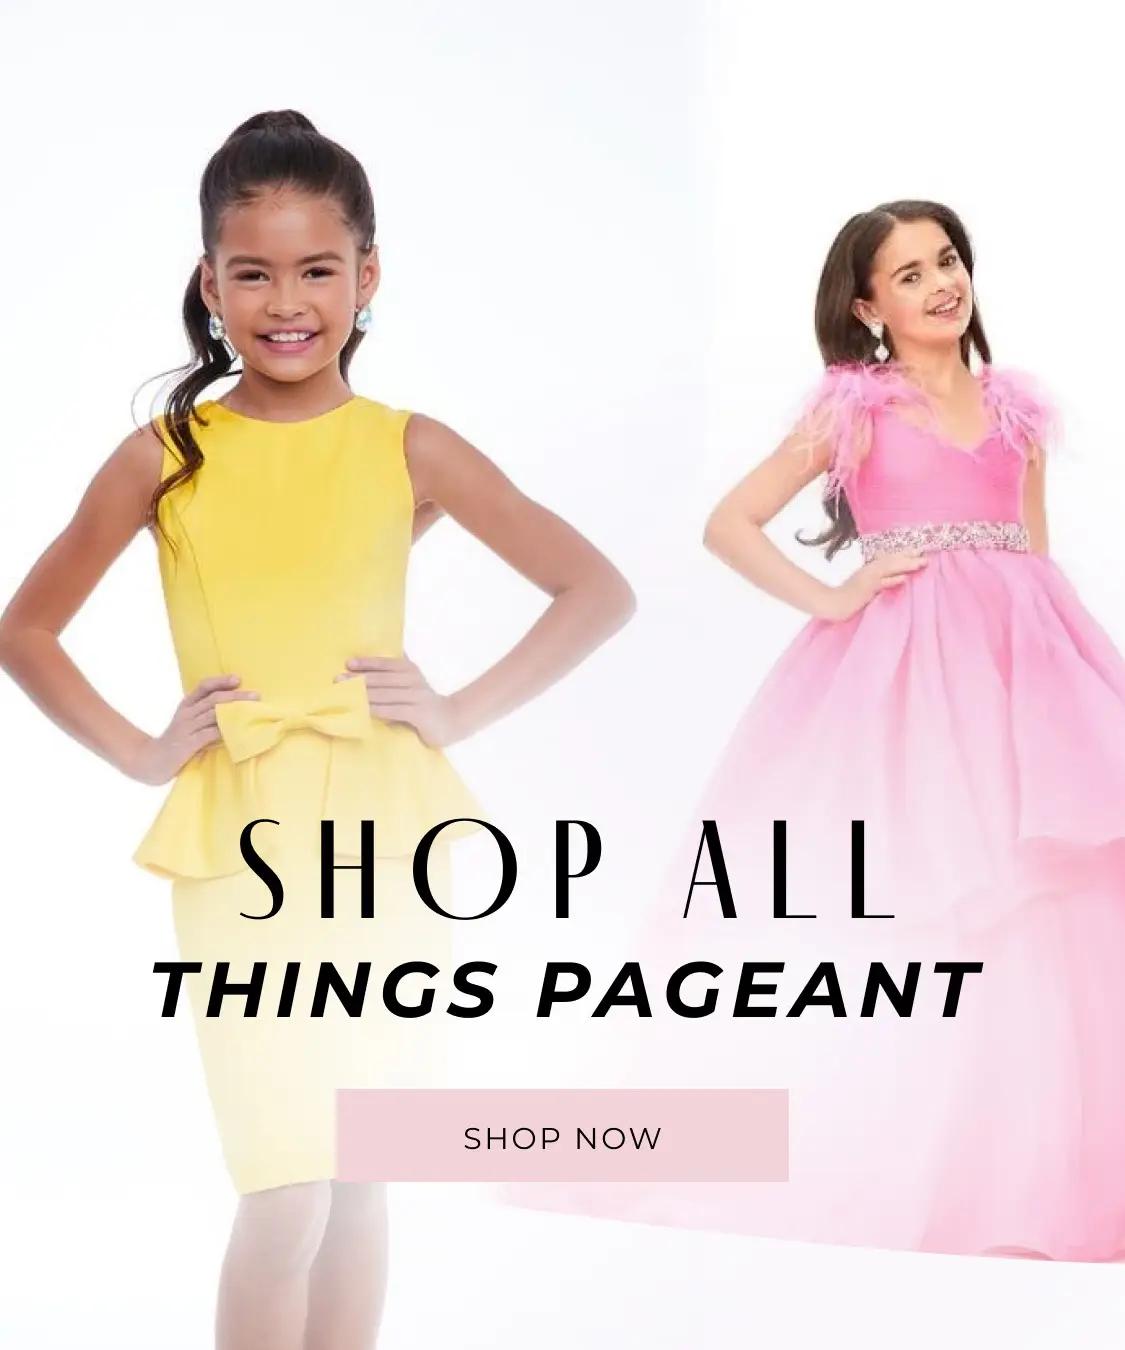 Shop Pageant Mobile Banner